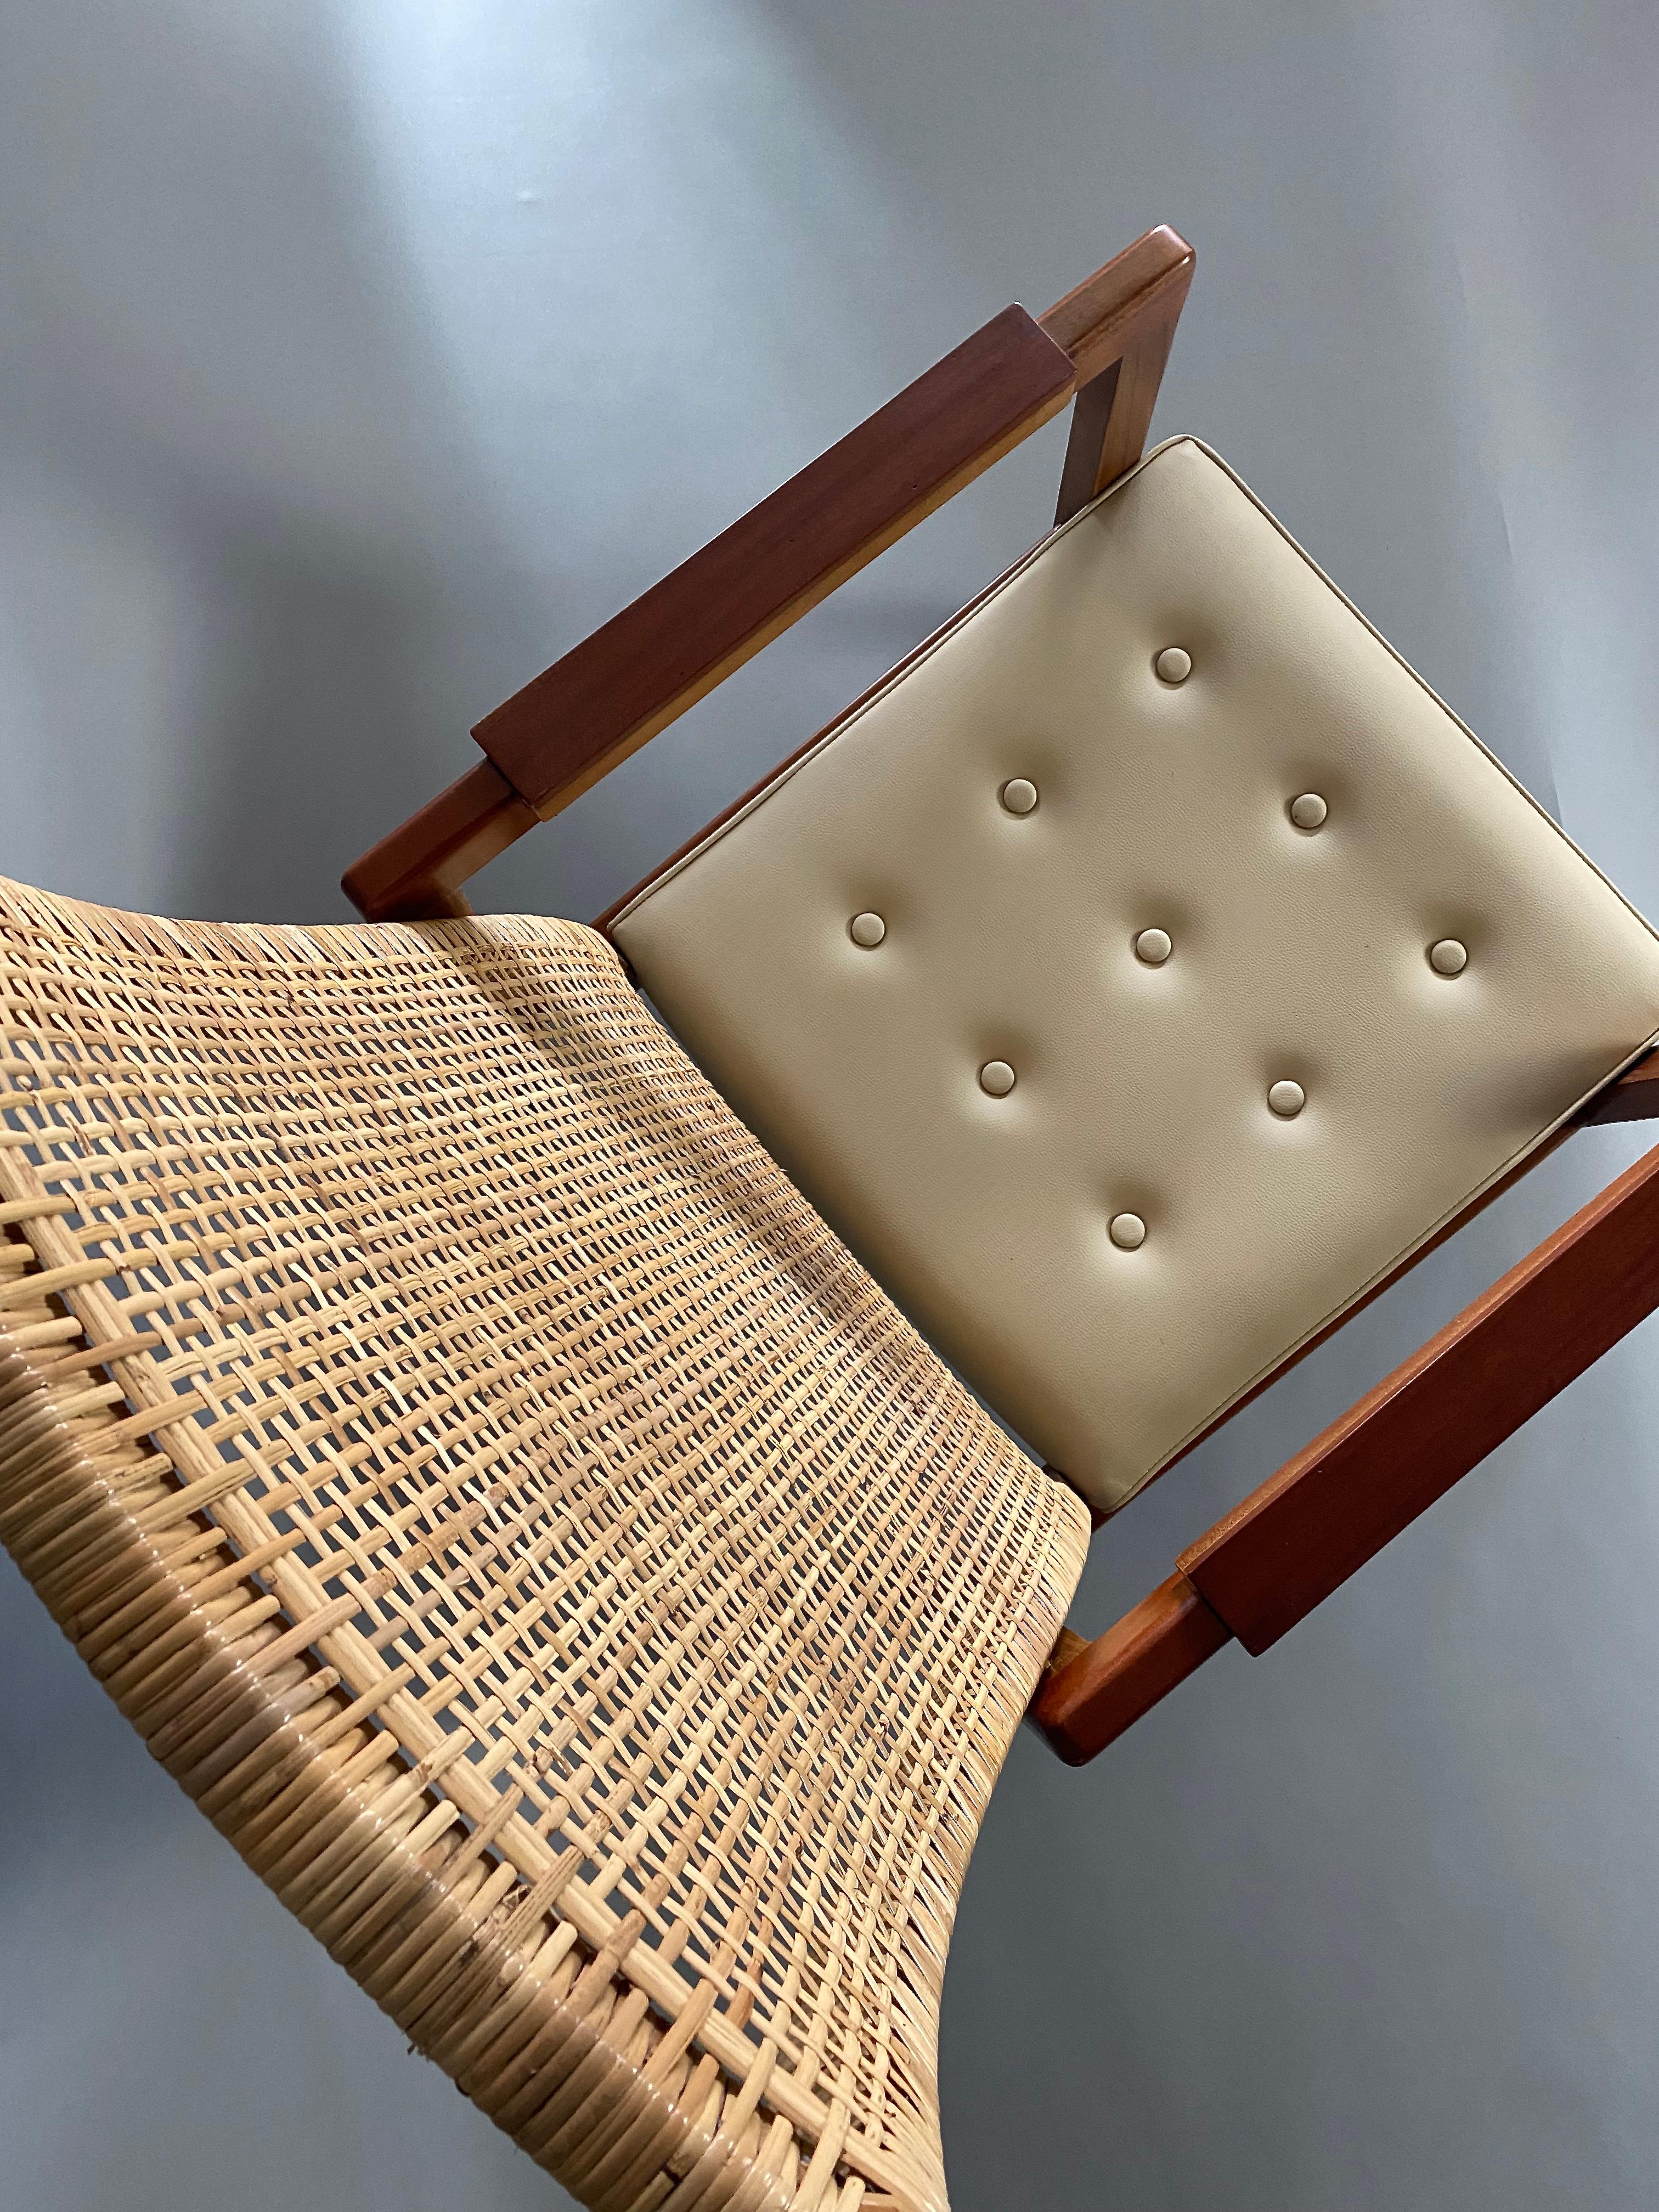 Stylish and classy set of Mid-Century Modern lounge chairs in great condition. These elegant chairs have beautiful webbed cane curved backrests all intact. The ivory colored comfortable faux leather cane seat cushions are also in great condition as